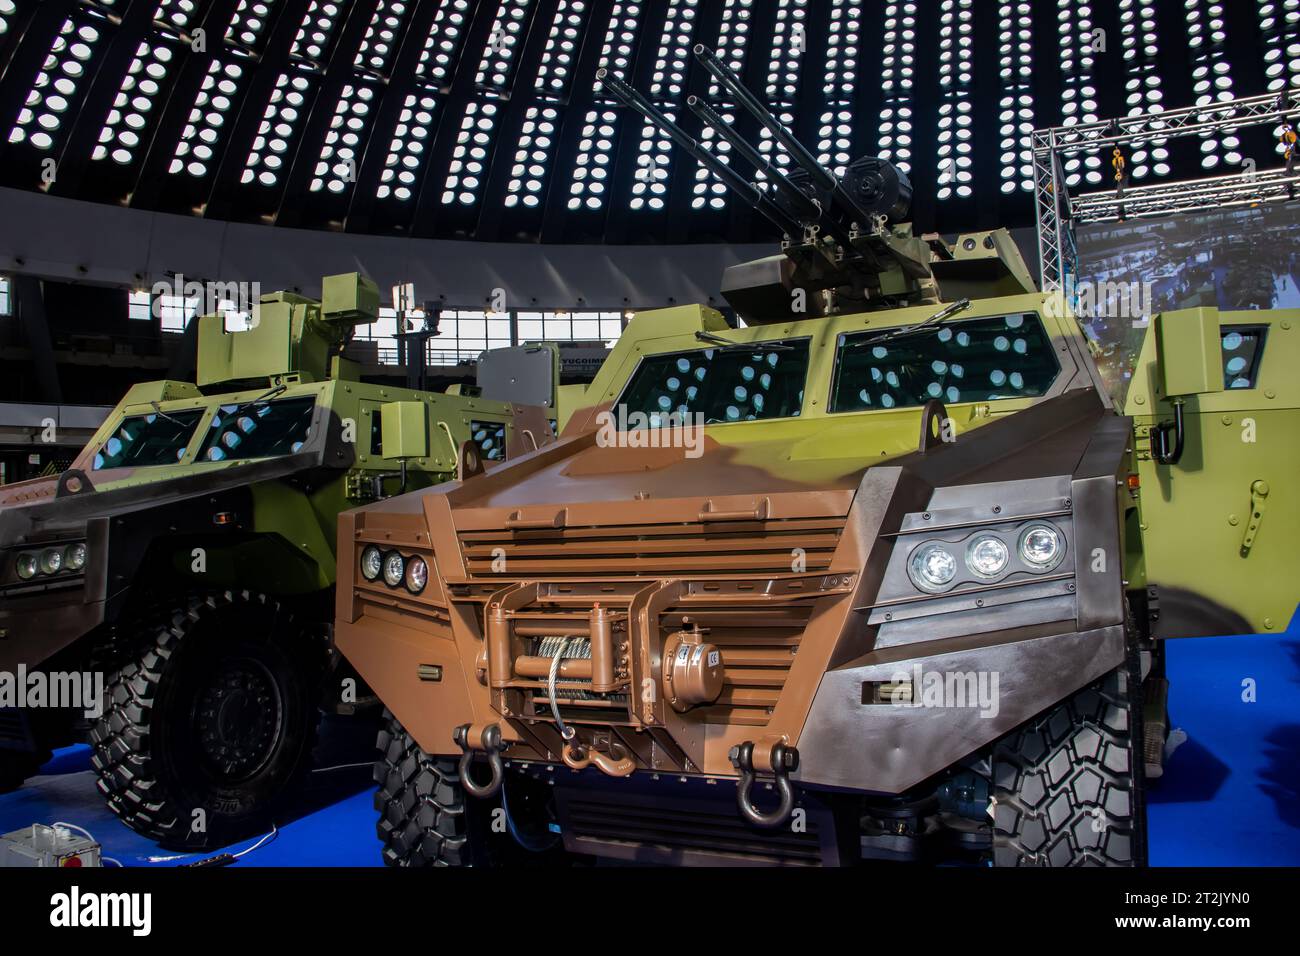 Armored combat vehicle painted in camouflage colors, armed with lethal machine gun and rocket launcher, at the international arms fair in Belgrade Stock Photo